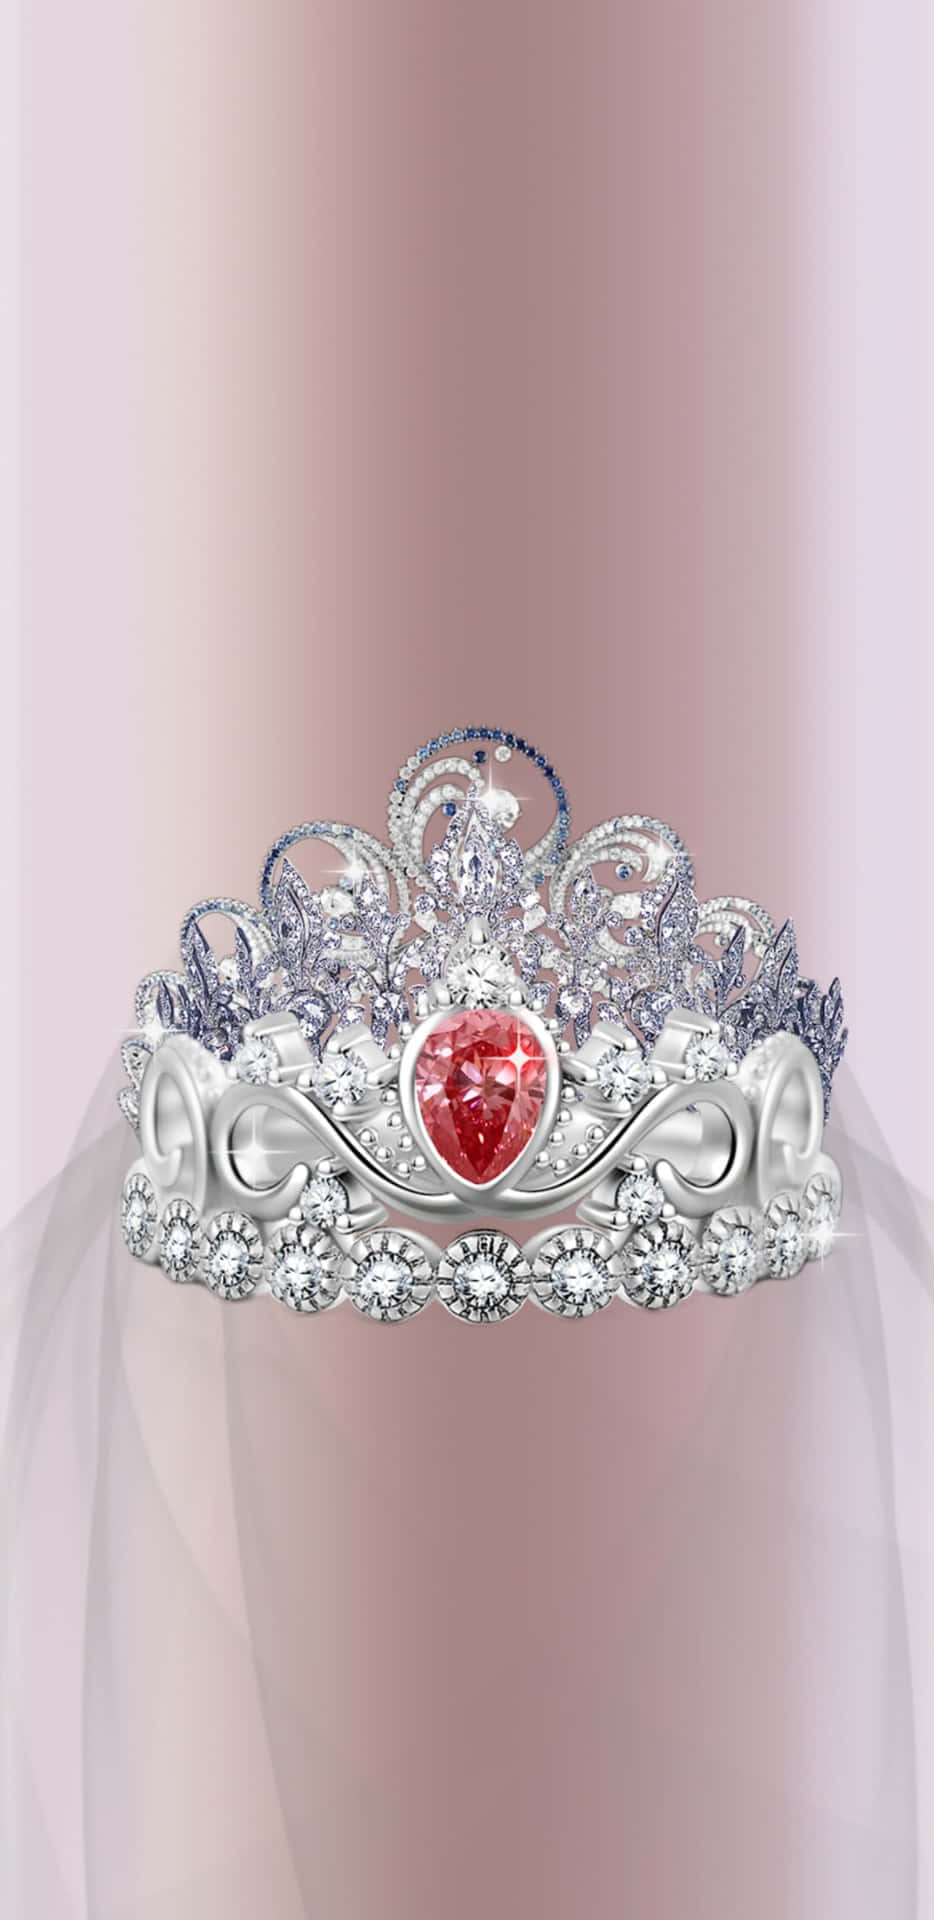 A Tiara With A Red Heart And Diamonds Wallpaper